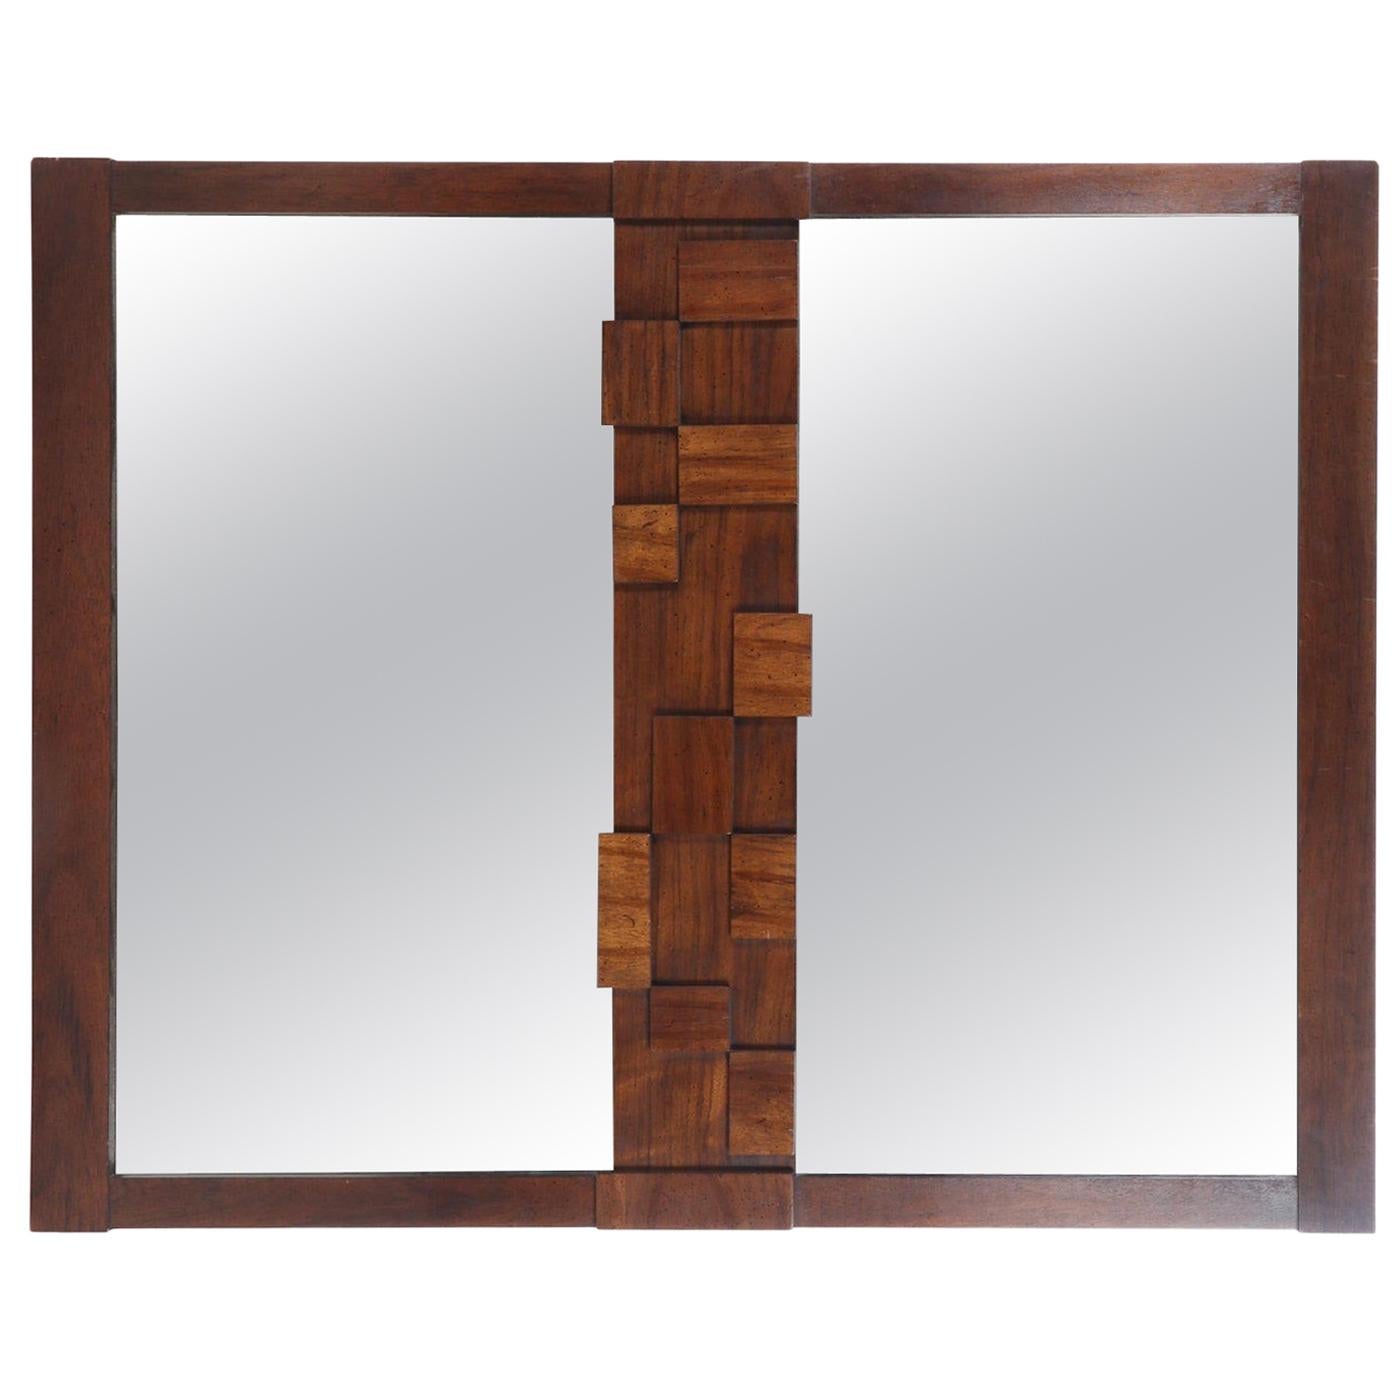 Large Mid-Century Modernist Brutalist Double Mirror by Lane Furniture For Sale